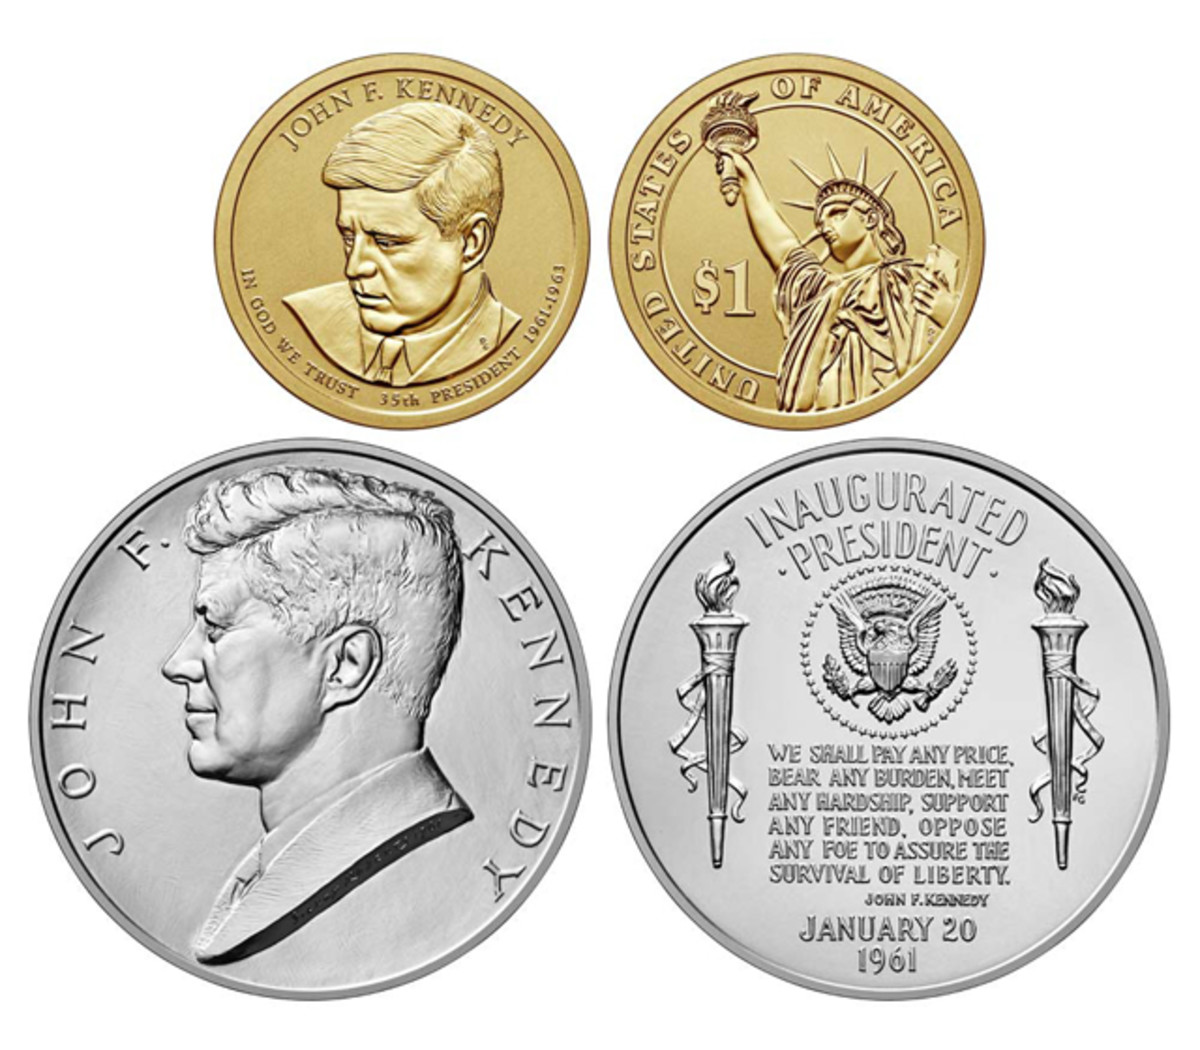 Compared to the Truman and Ike sets, the Kennedy set offers little to no profit on the secondary market for coin flippers.